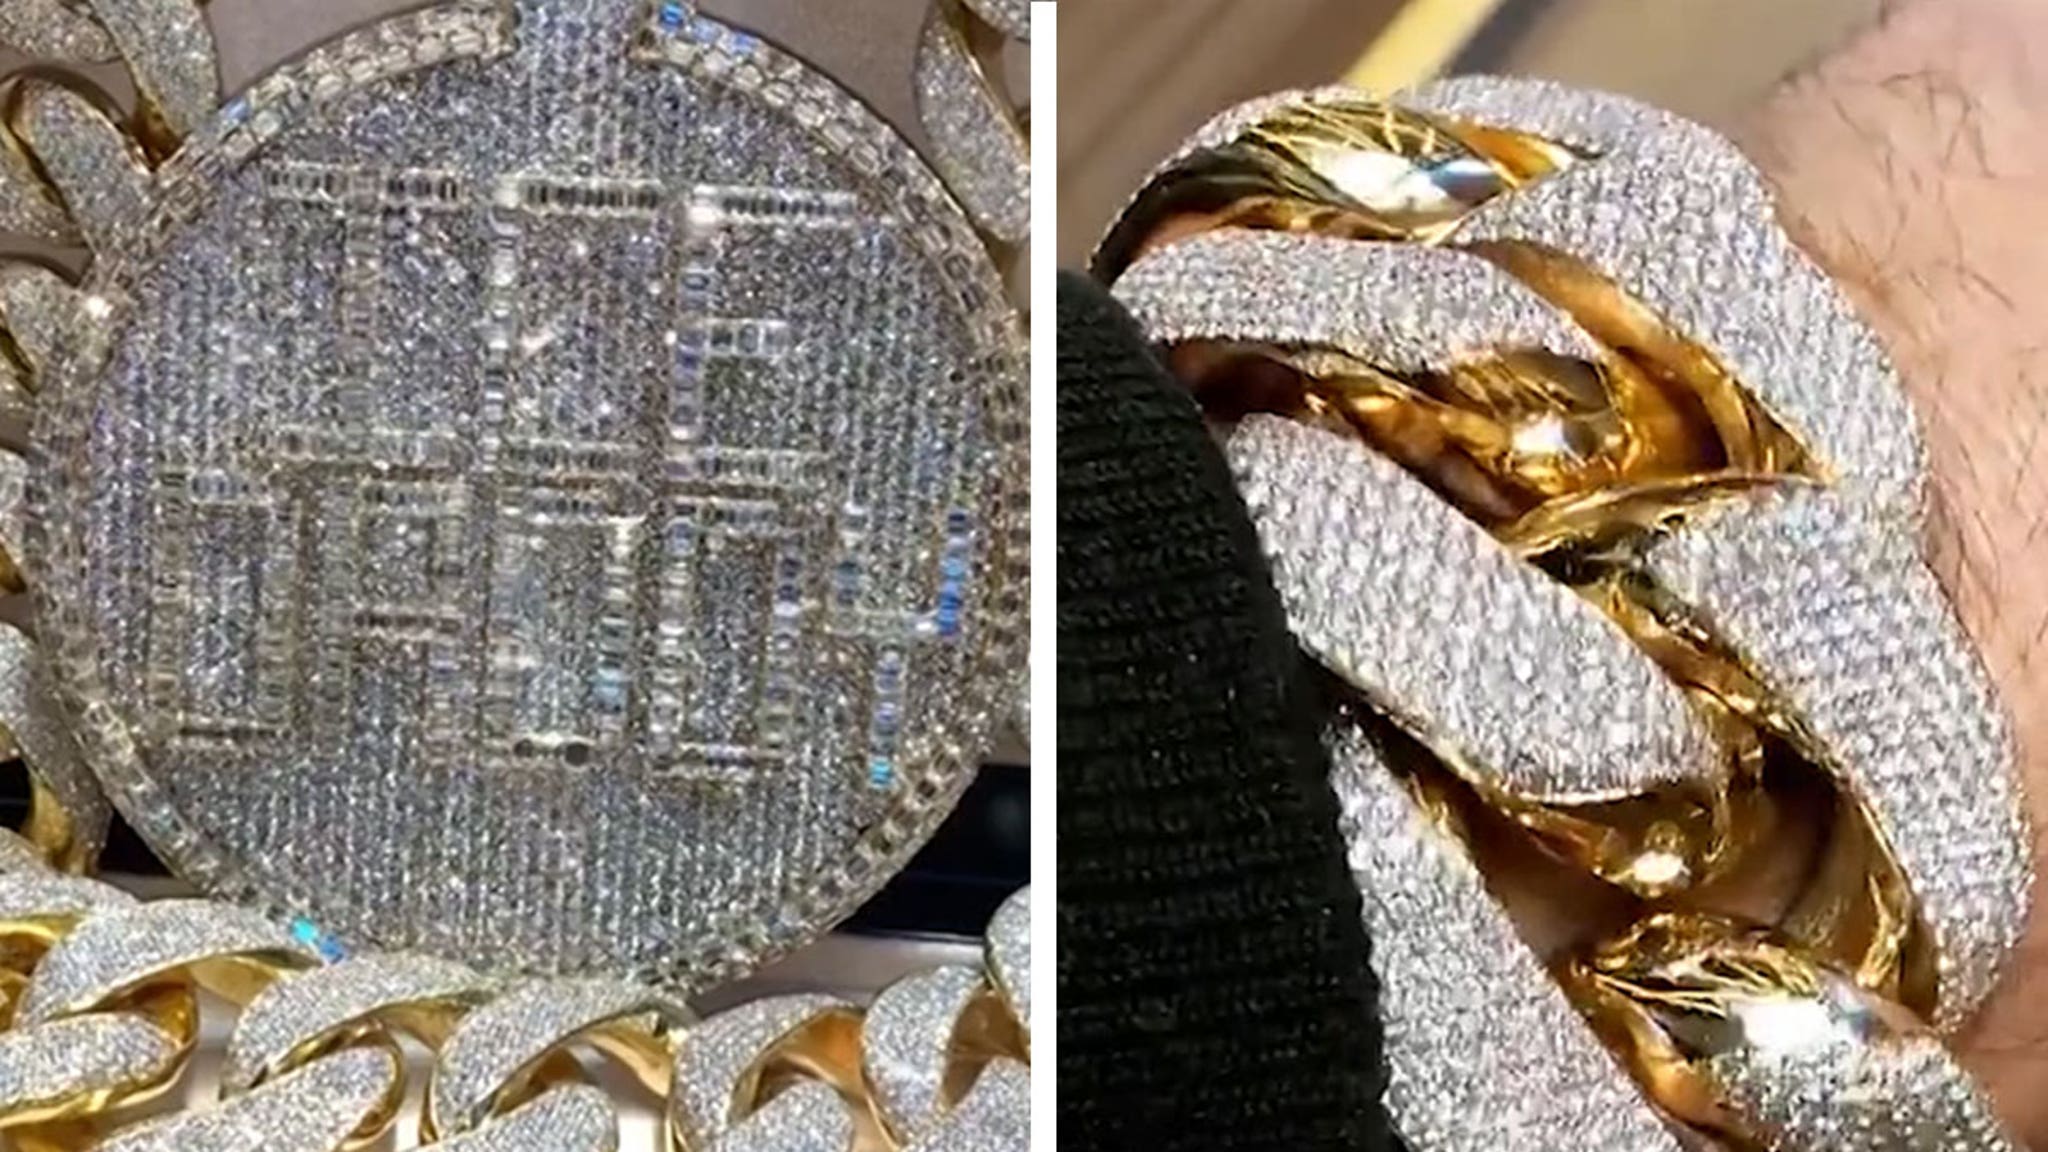 The wife of Gucci Mane gives him the ‘biggest’ Cuban link chain and pendant